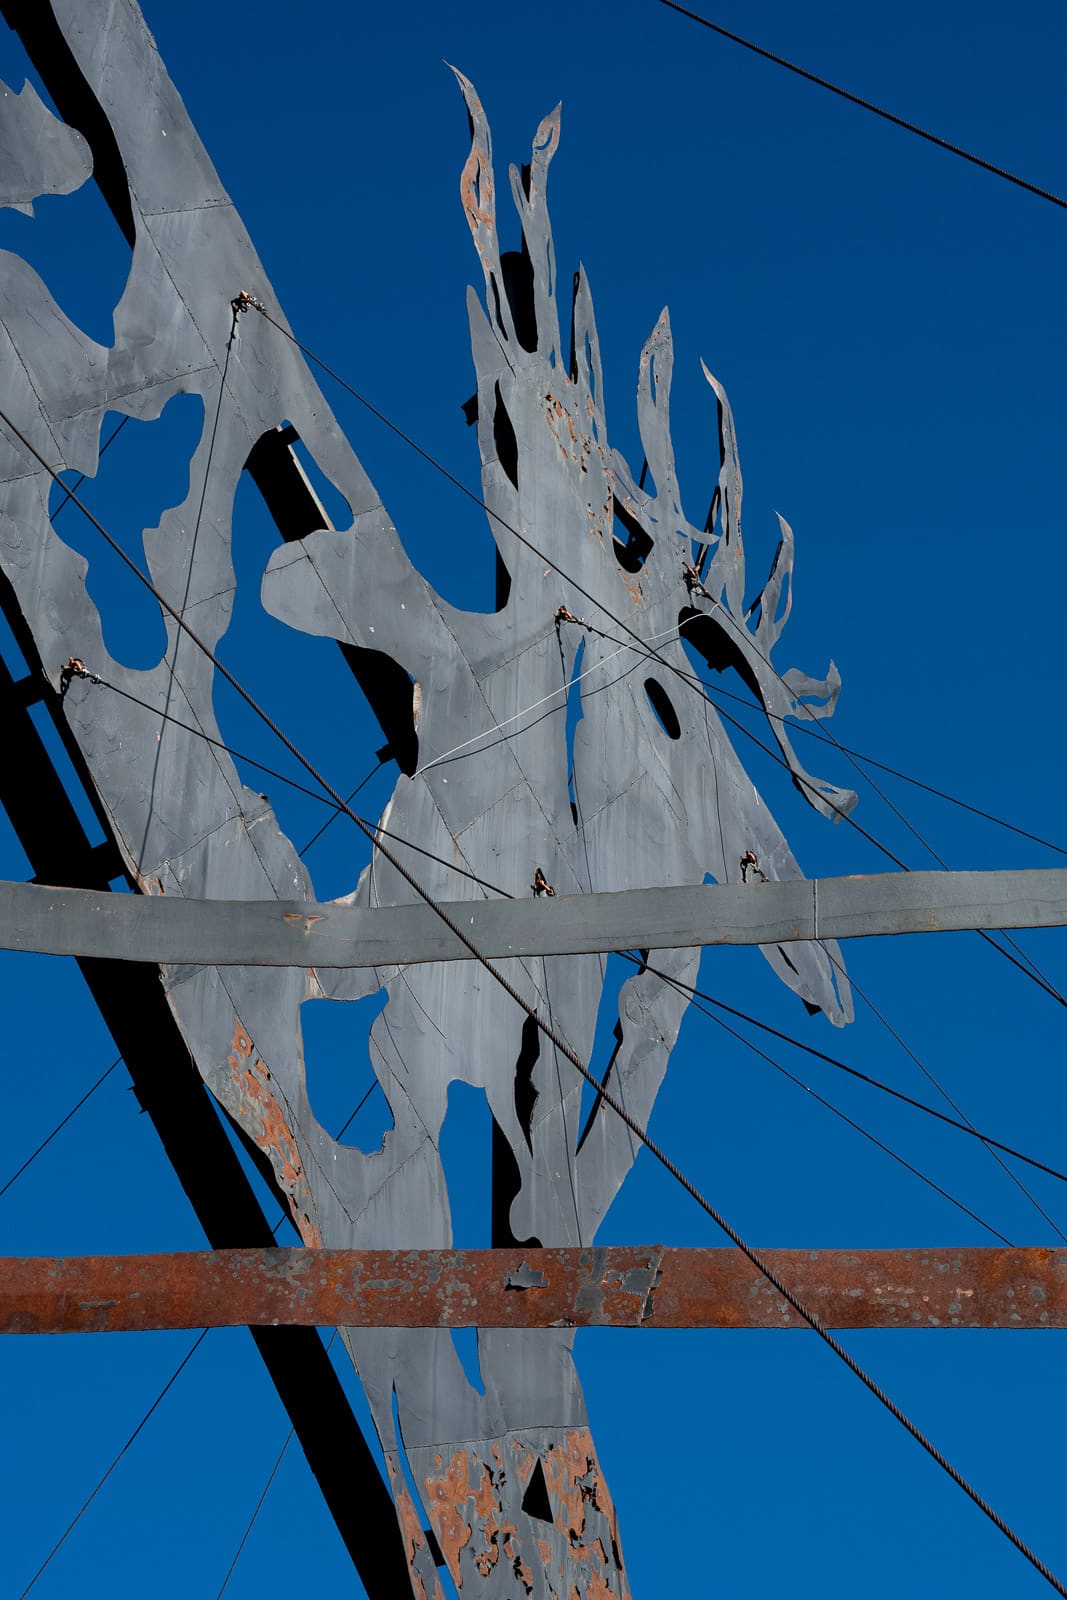 This is a detail of the sculpture by Gary Greff, called Deer Crossing. It is located along the Enchanted Highway, between I-94 and Regent, North Dakota.